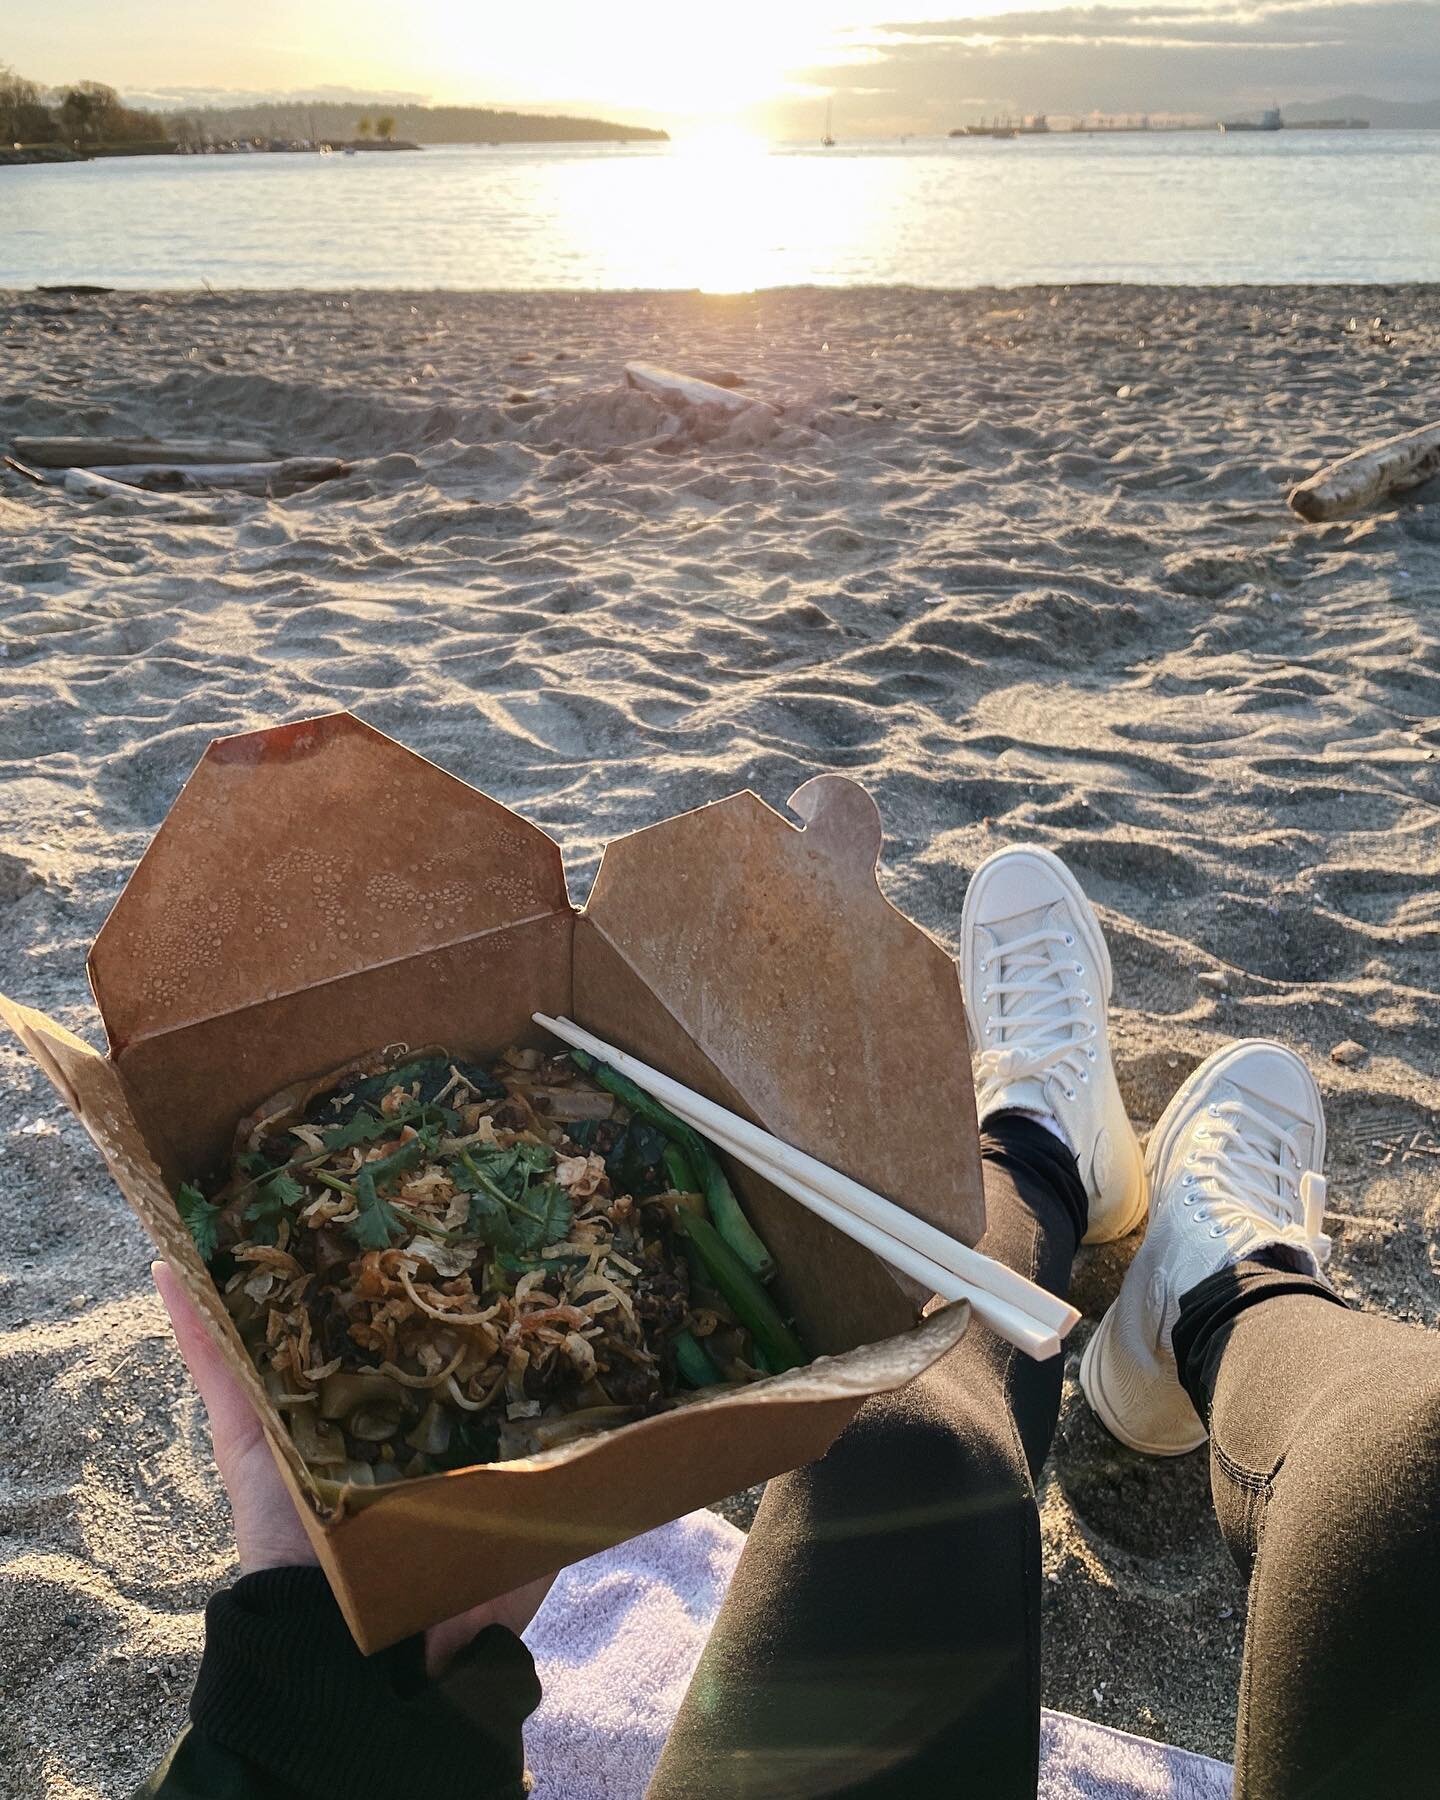 Eating by the ocean hits different
.
.
.
.
.
#vancityeats #vancouverfoodie #vancouverfood #eatingbythesea #pacificnorthwest #vaneats #vancouverblogger #vancouverbc